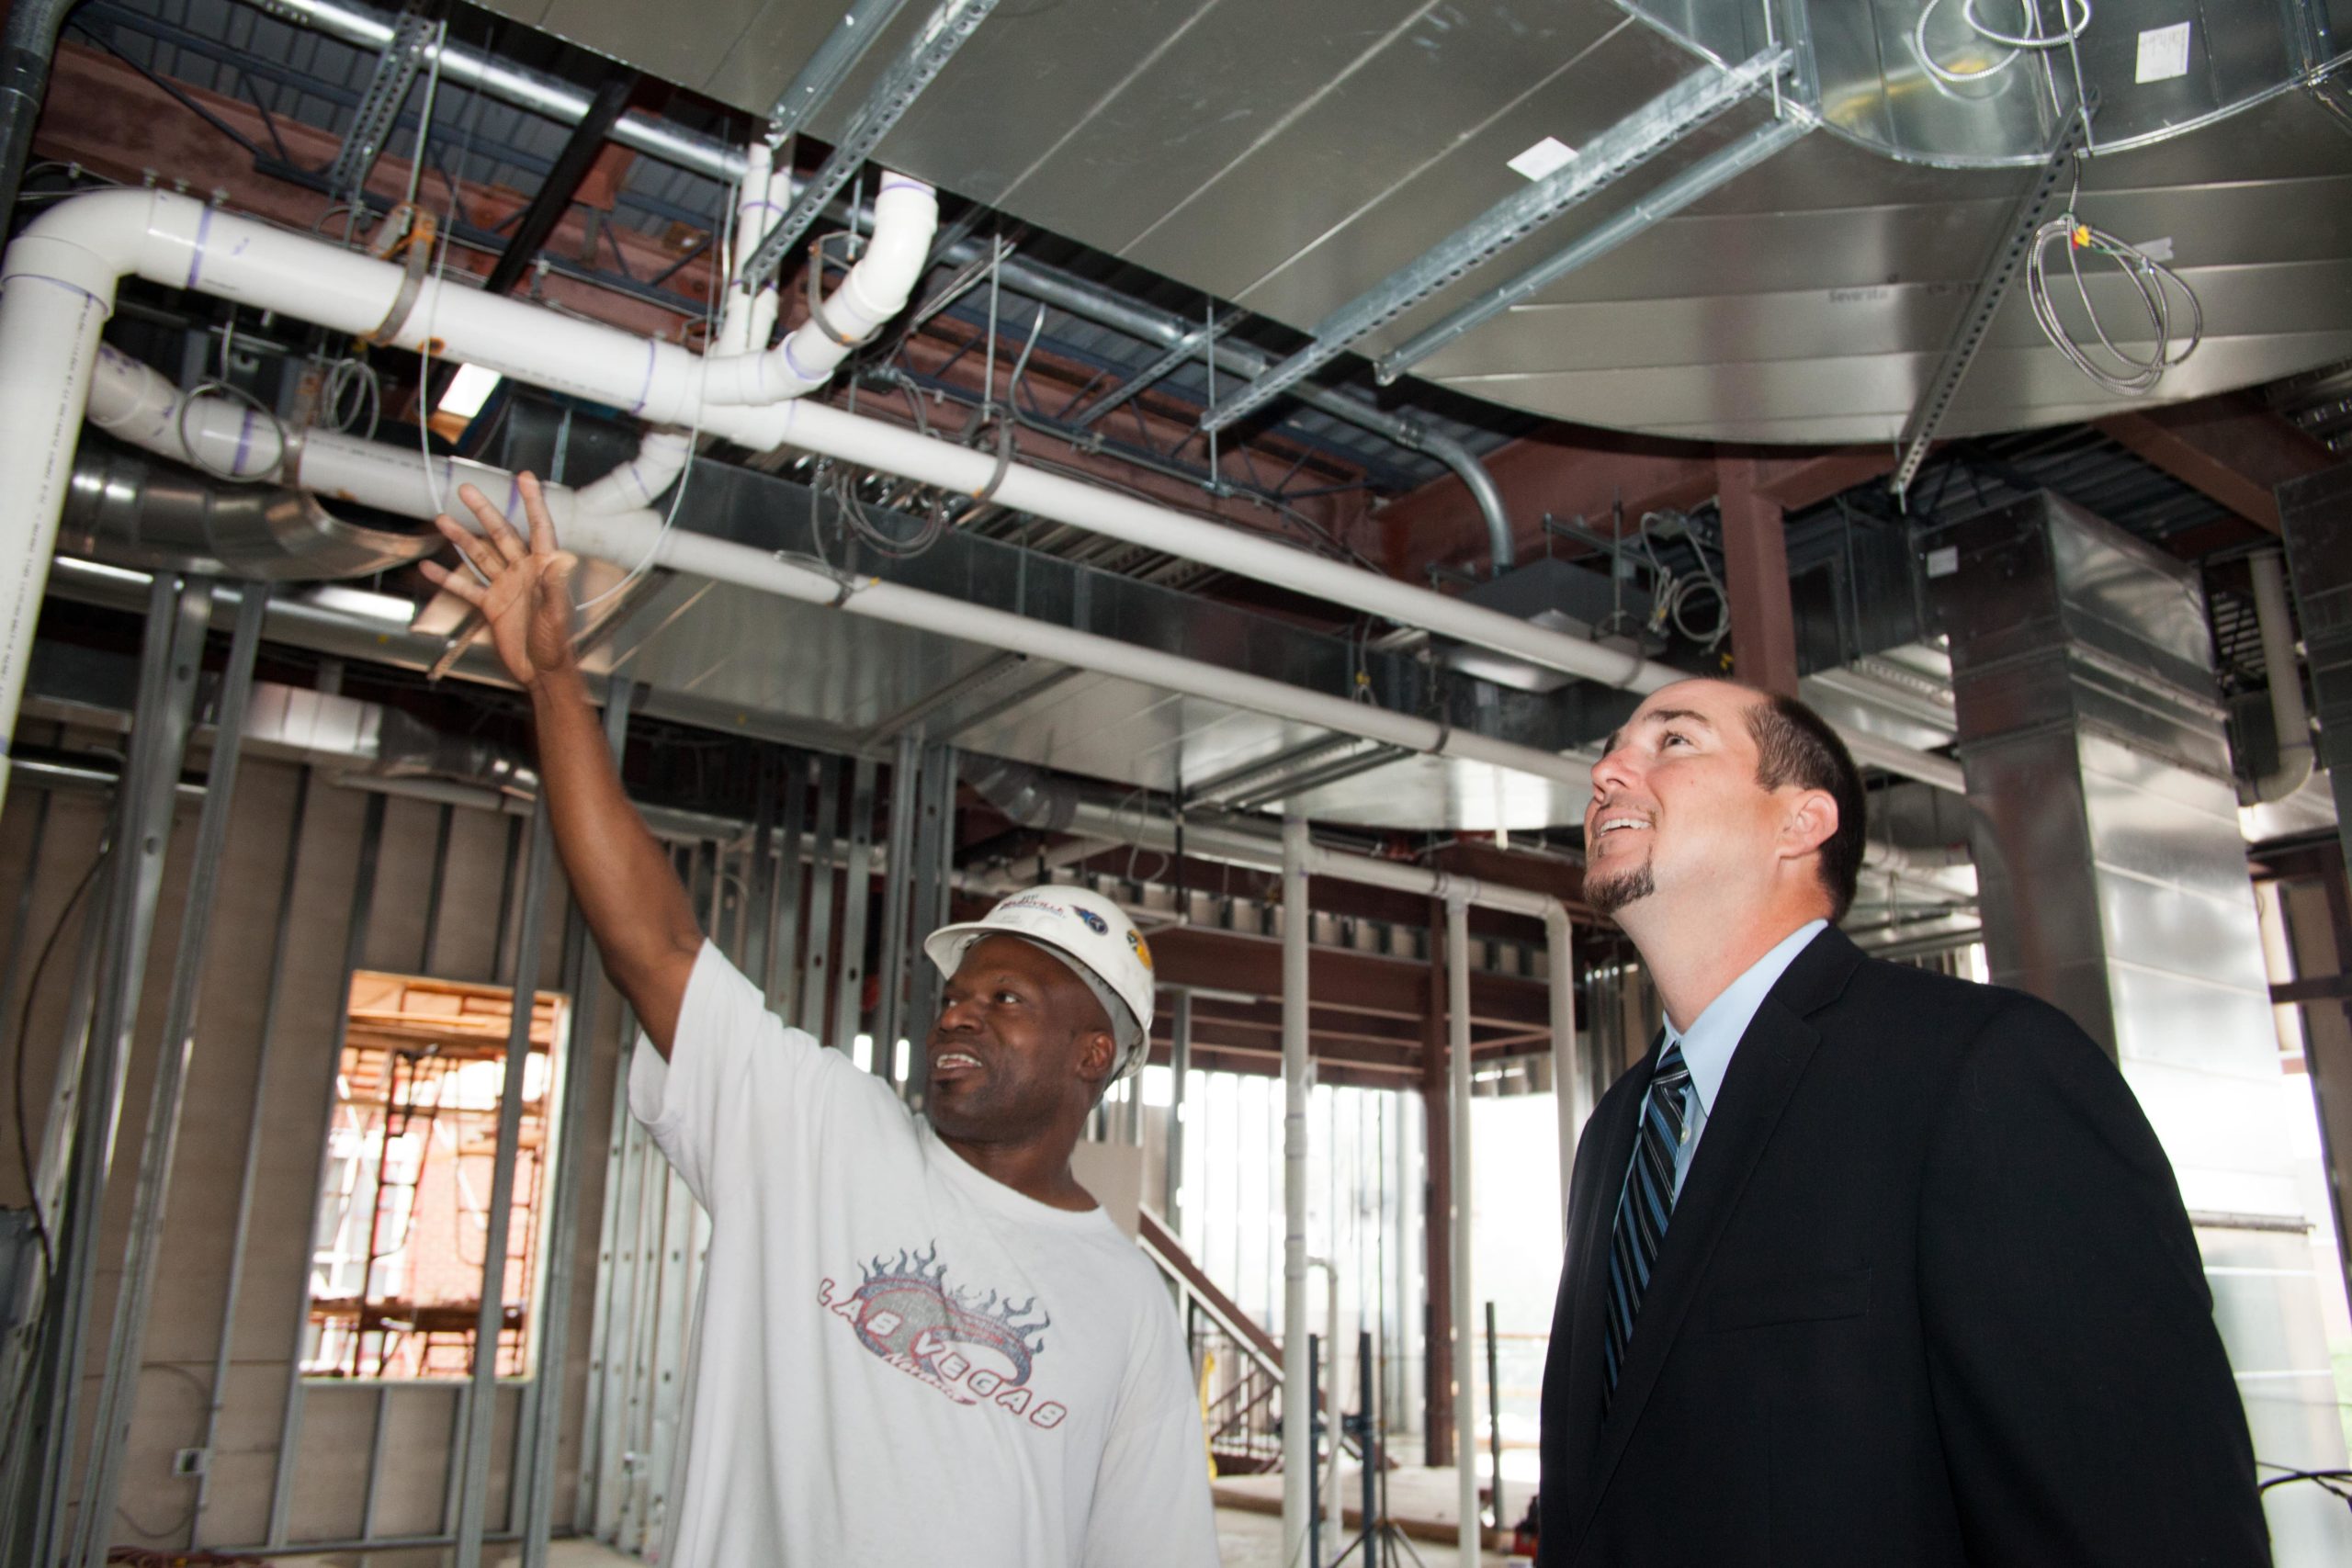 construction worker showing project under construction to man in suit